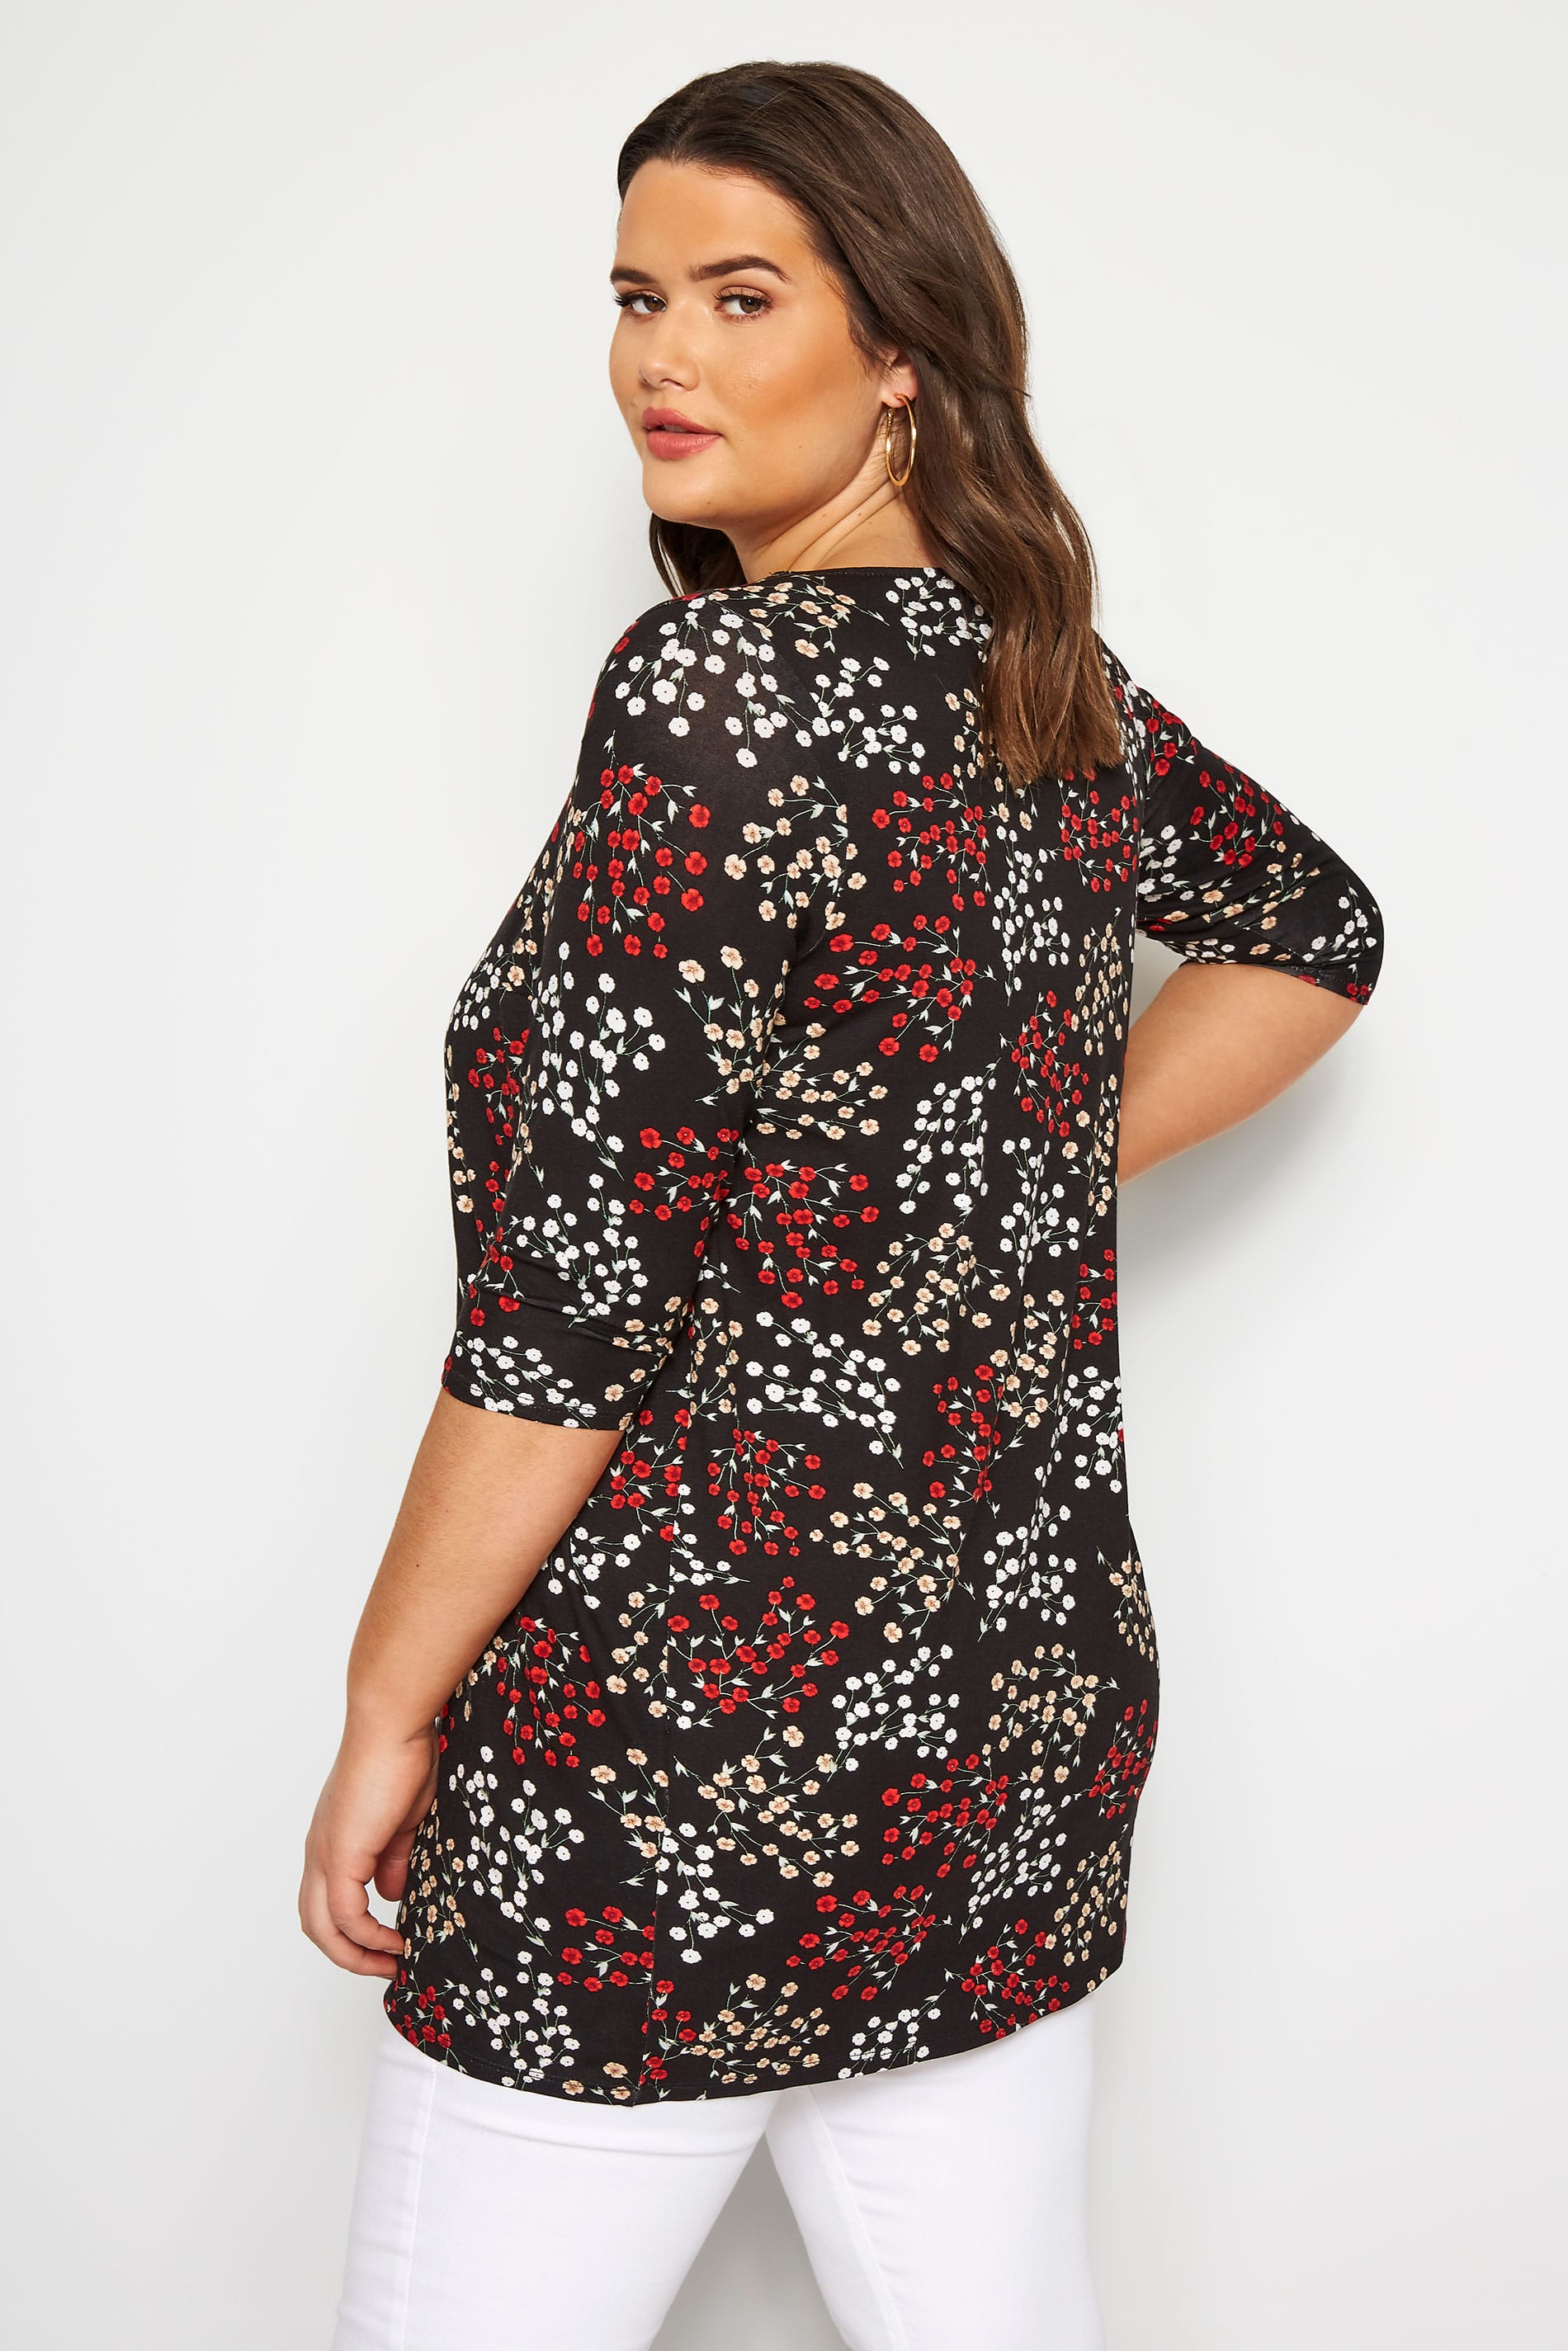 SIZE UP Black Floral Longline Top | Sizes 16 to 32 | Yours Clothing